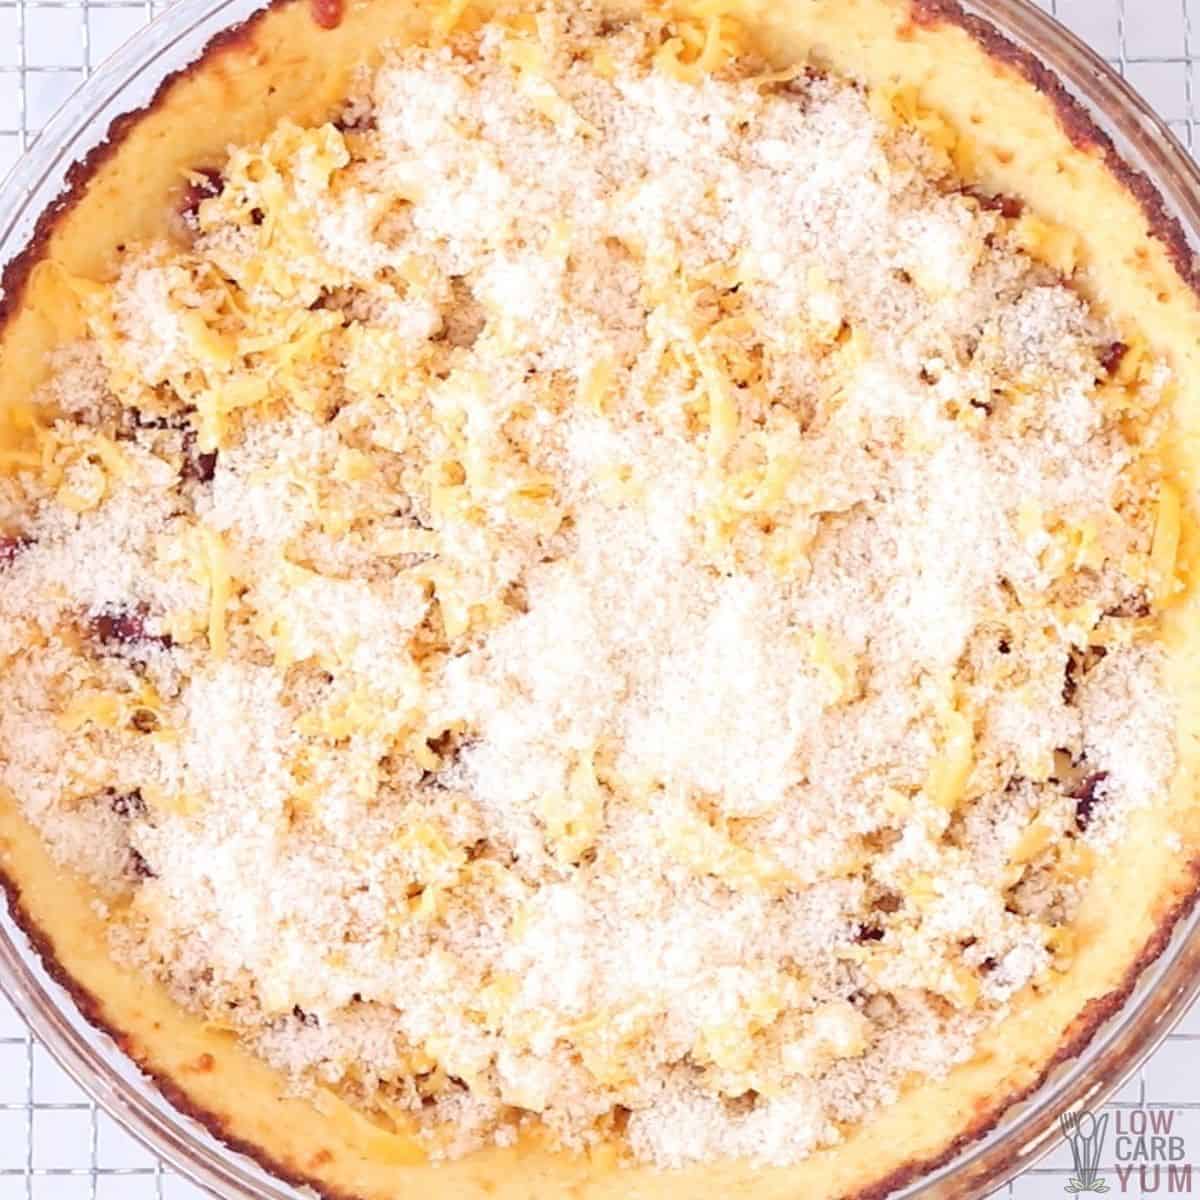 bacon and cheese sprinkled into cauliflower quiche crust.